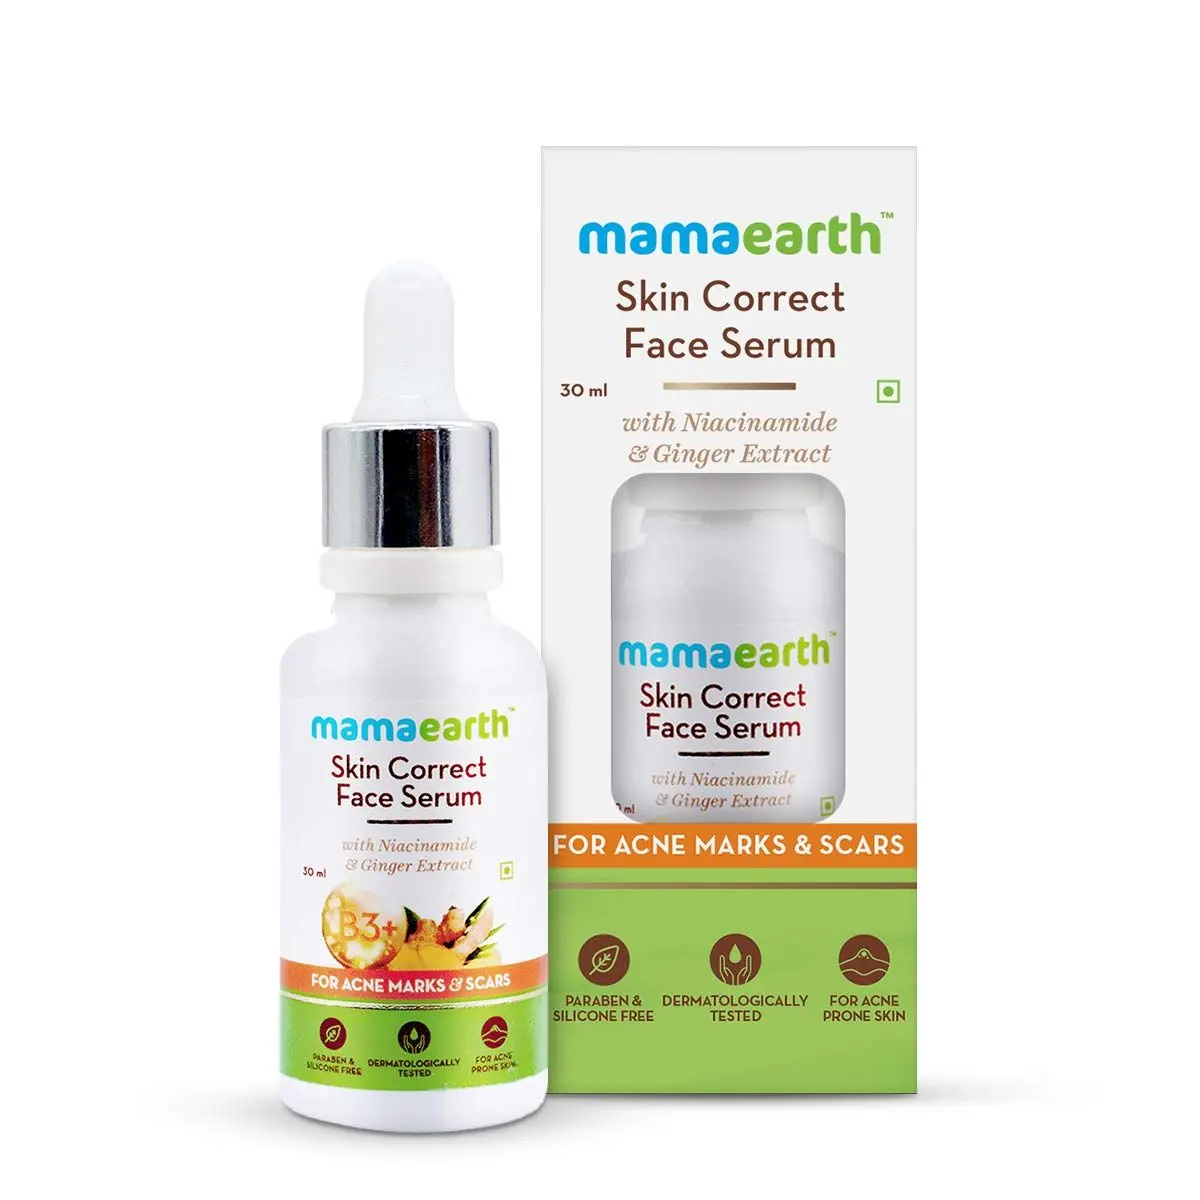 Mamaearth Skin Correct Face Serum with Niacinamide and Ginger Extract for Acne Marks & Scars (30 ml)